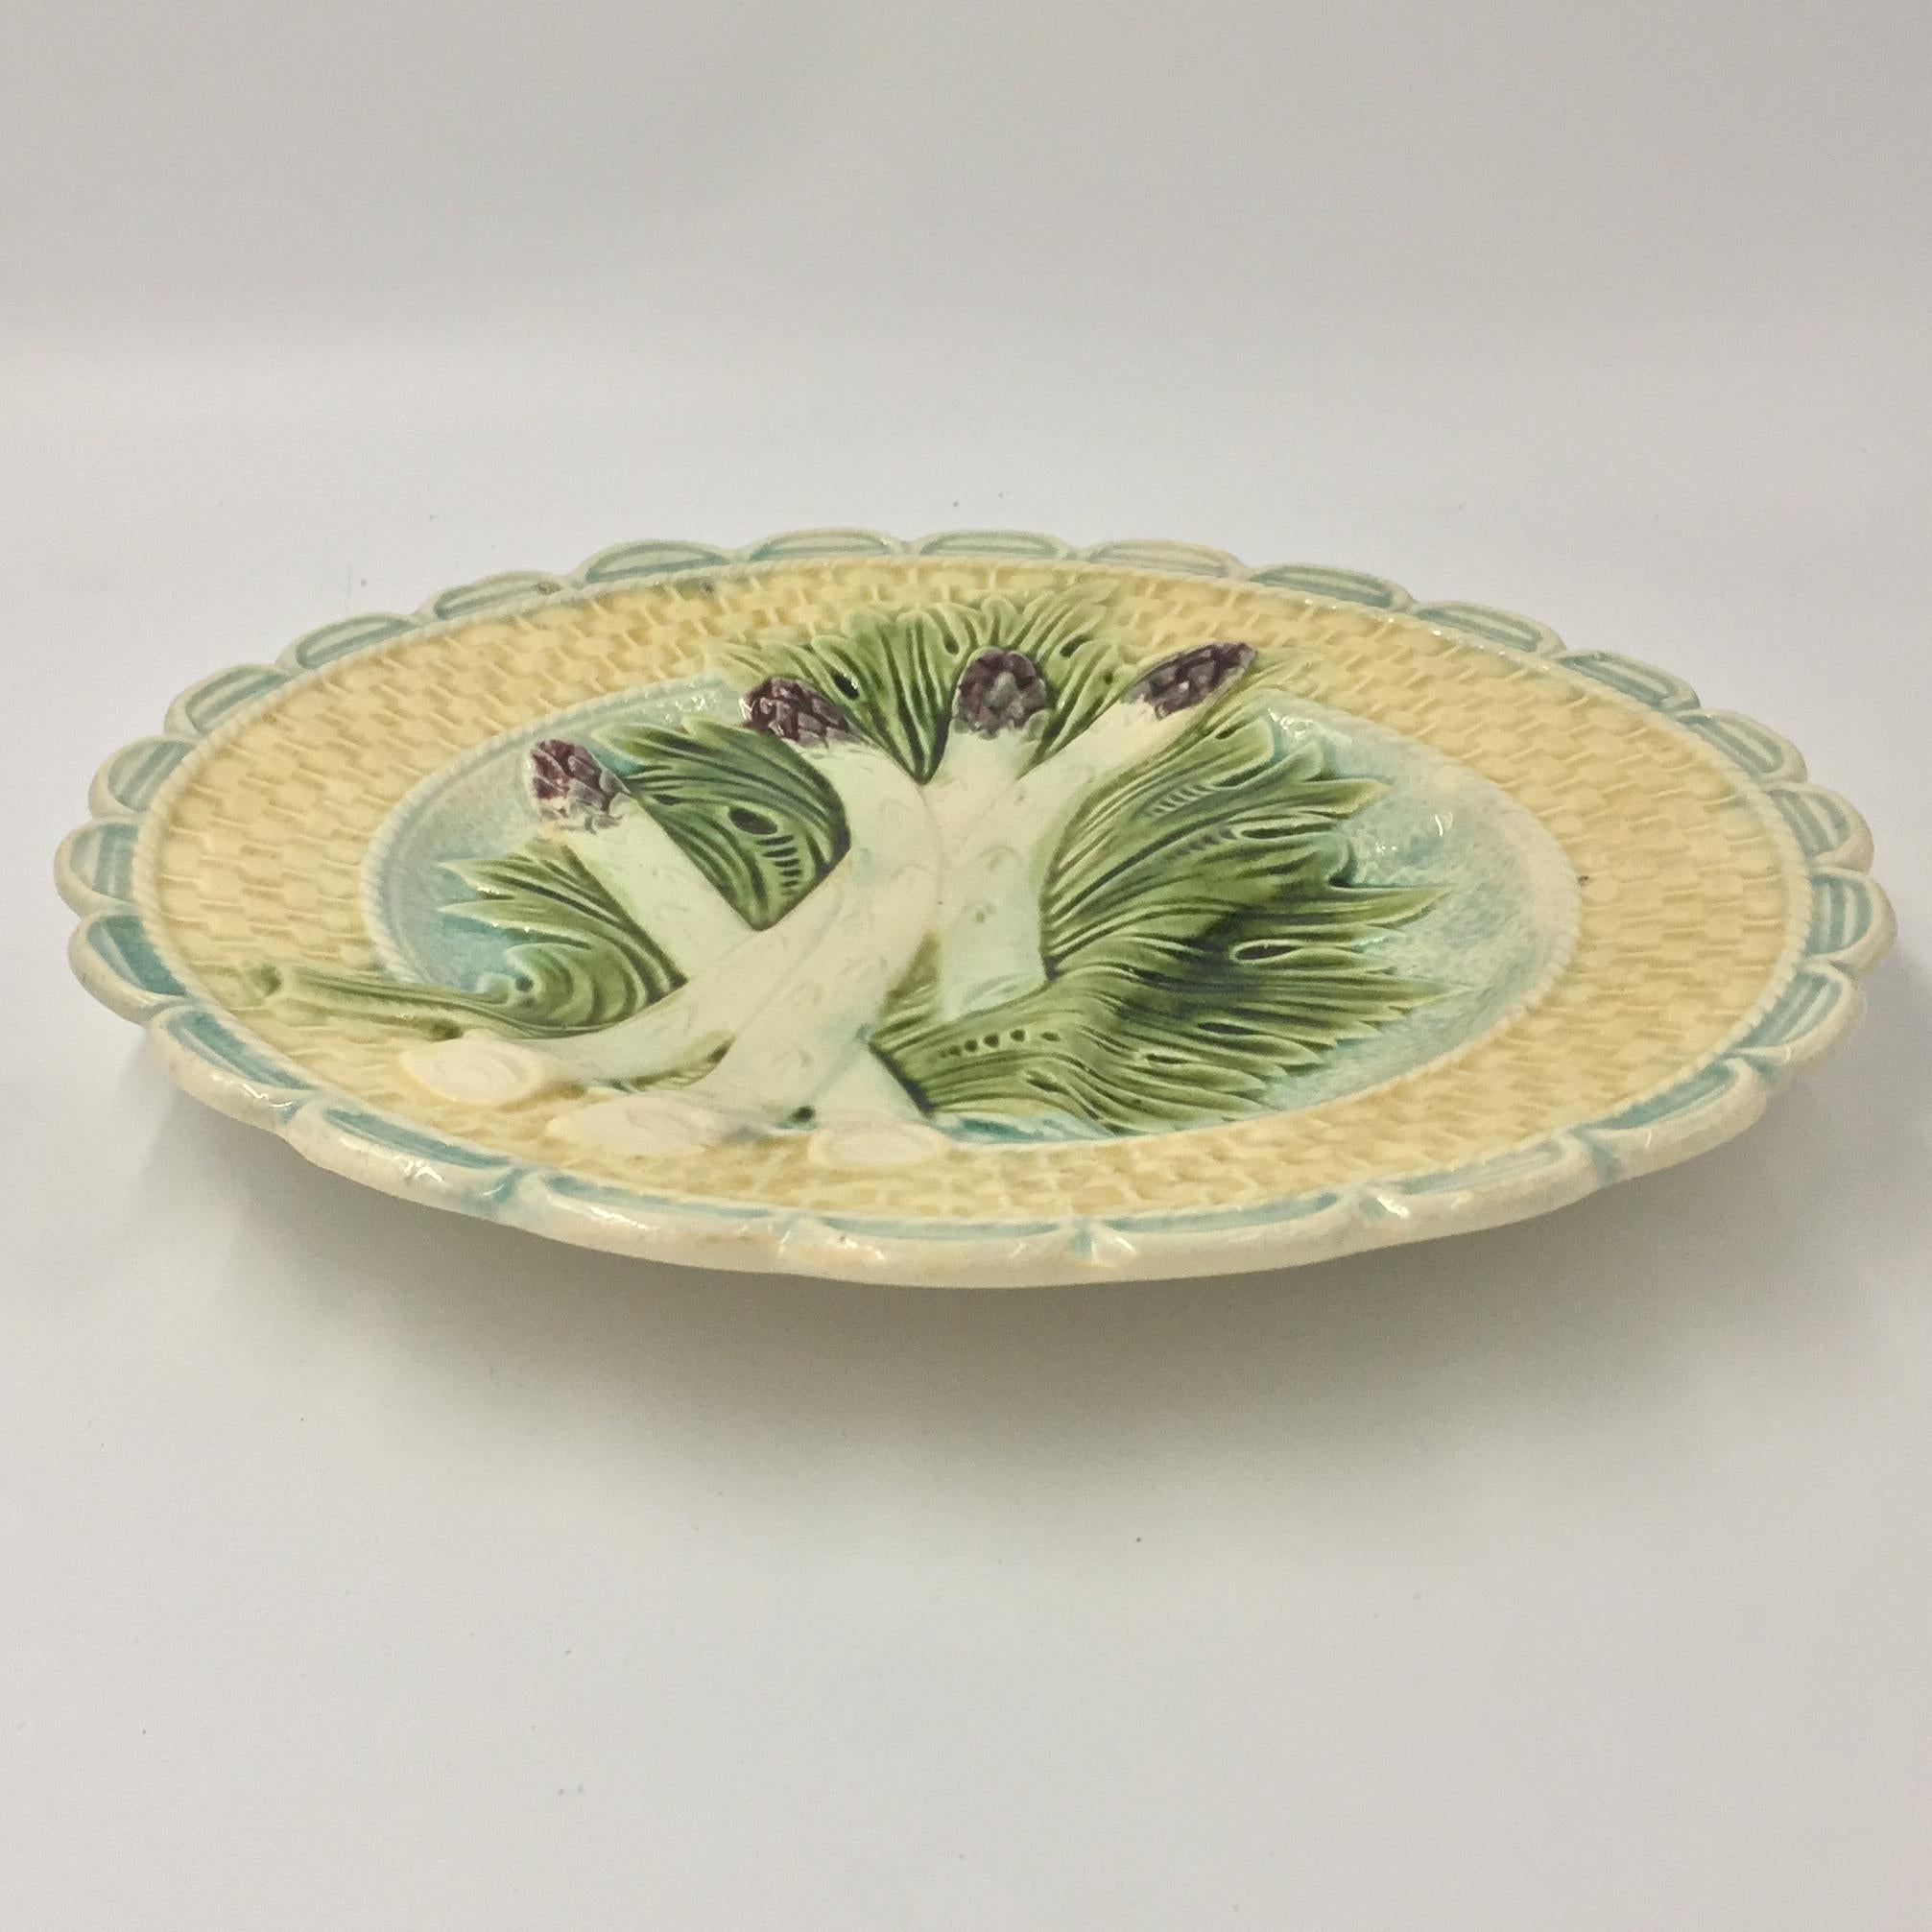 French majolica Asparagus plate  tray majolica  hand painted Asparagus serving platter  9 x 14 plate French country